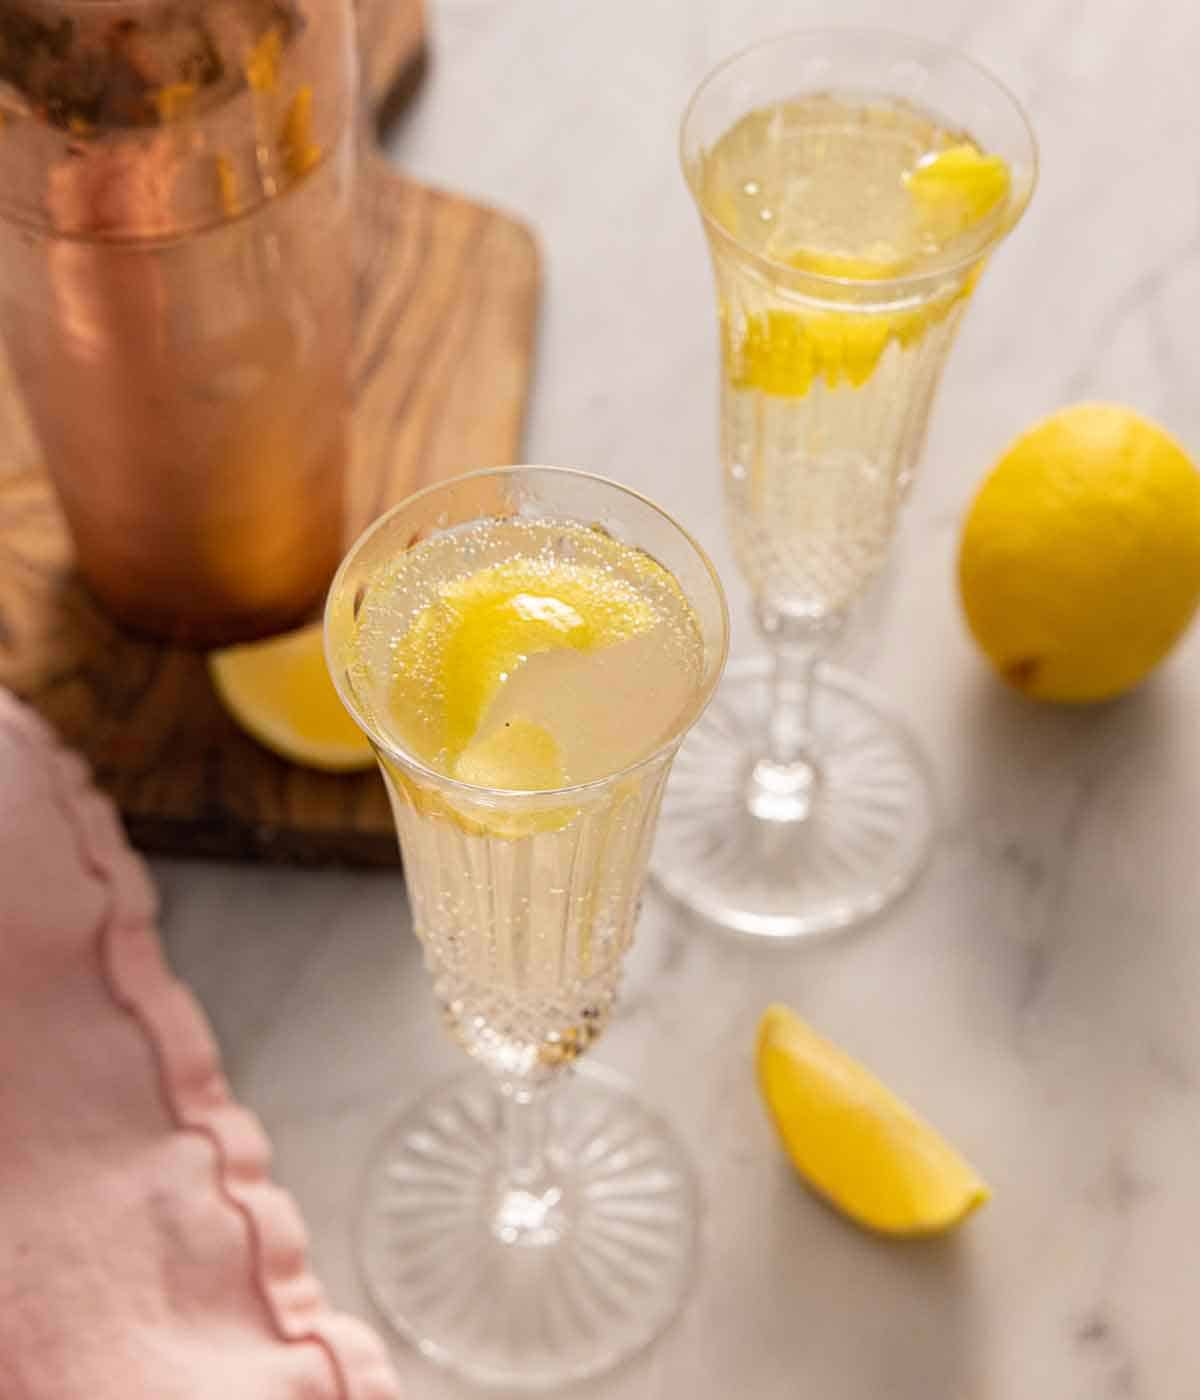 Overhead view of two glasses of French 75 with lemon peel garnishes.